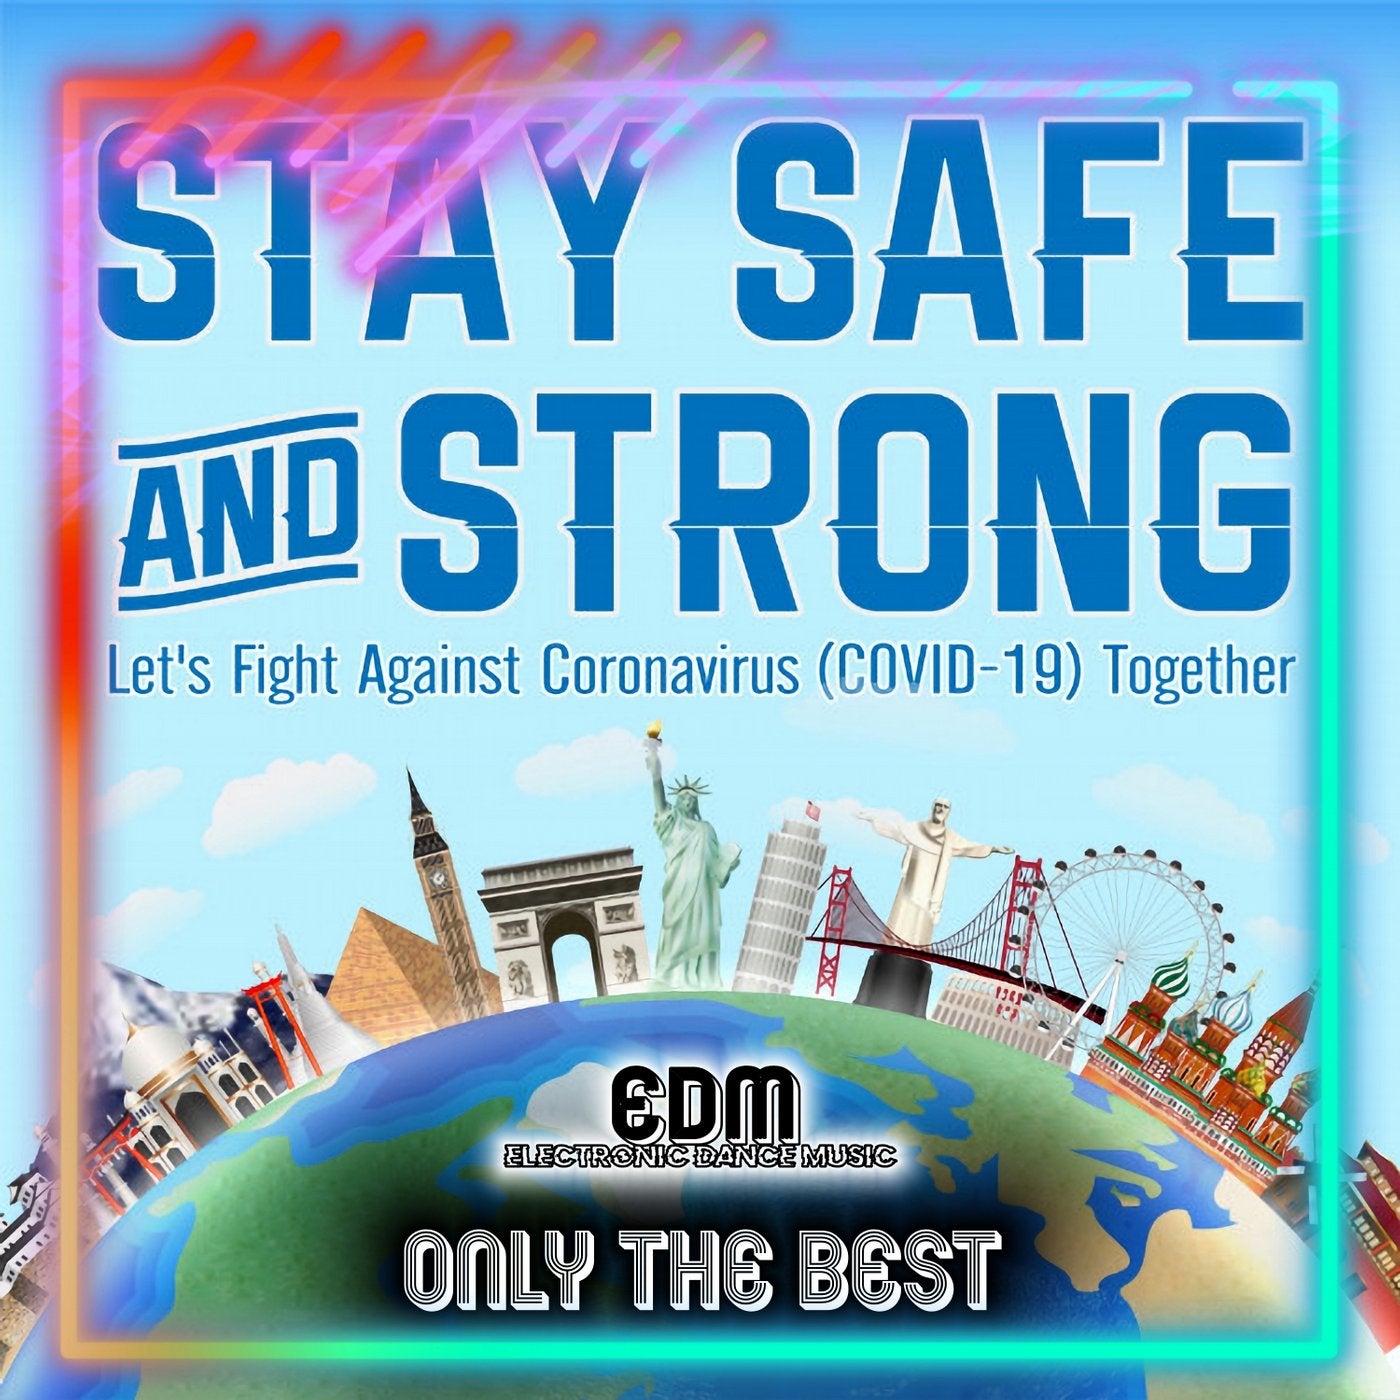 Stay Safe and Strong! (Let's Fight Coronavirus Covid19 Together EDM (Electronic Dance Music))